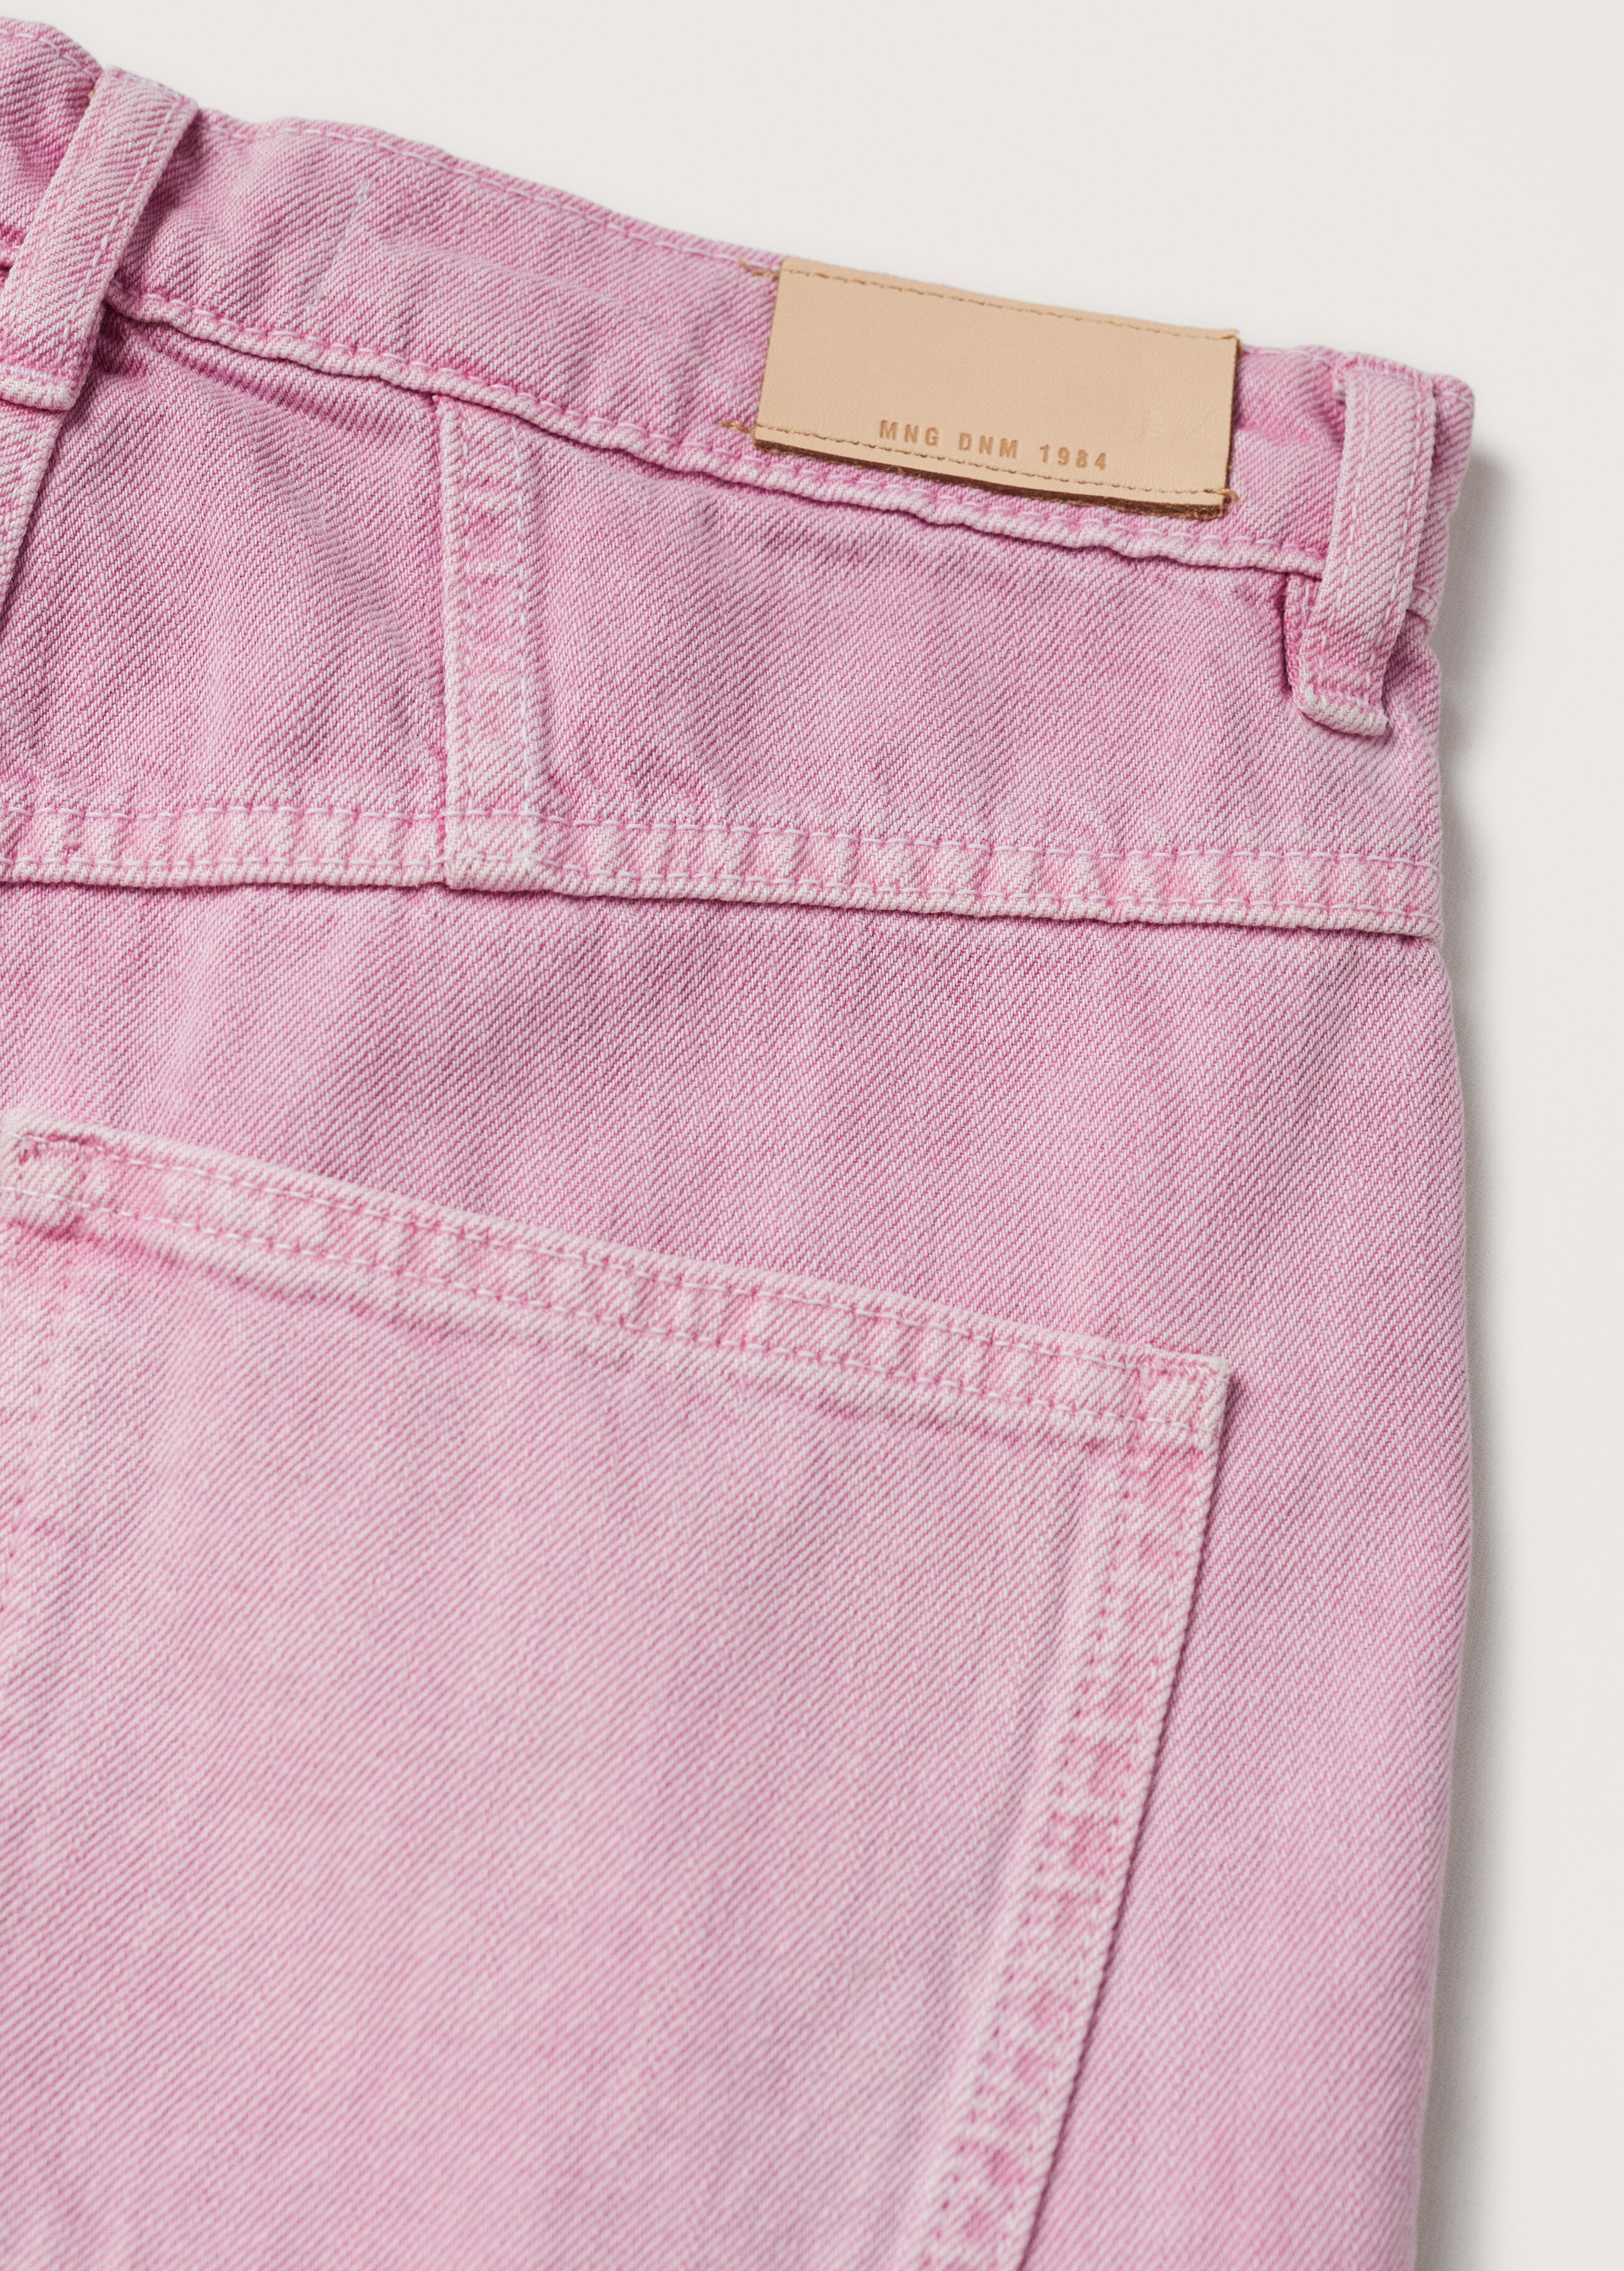 High-rise tapered jeans - Details of the article 8